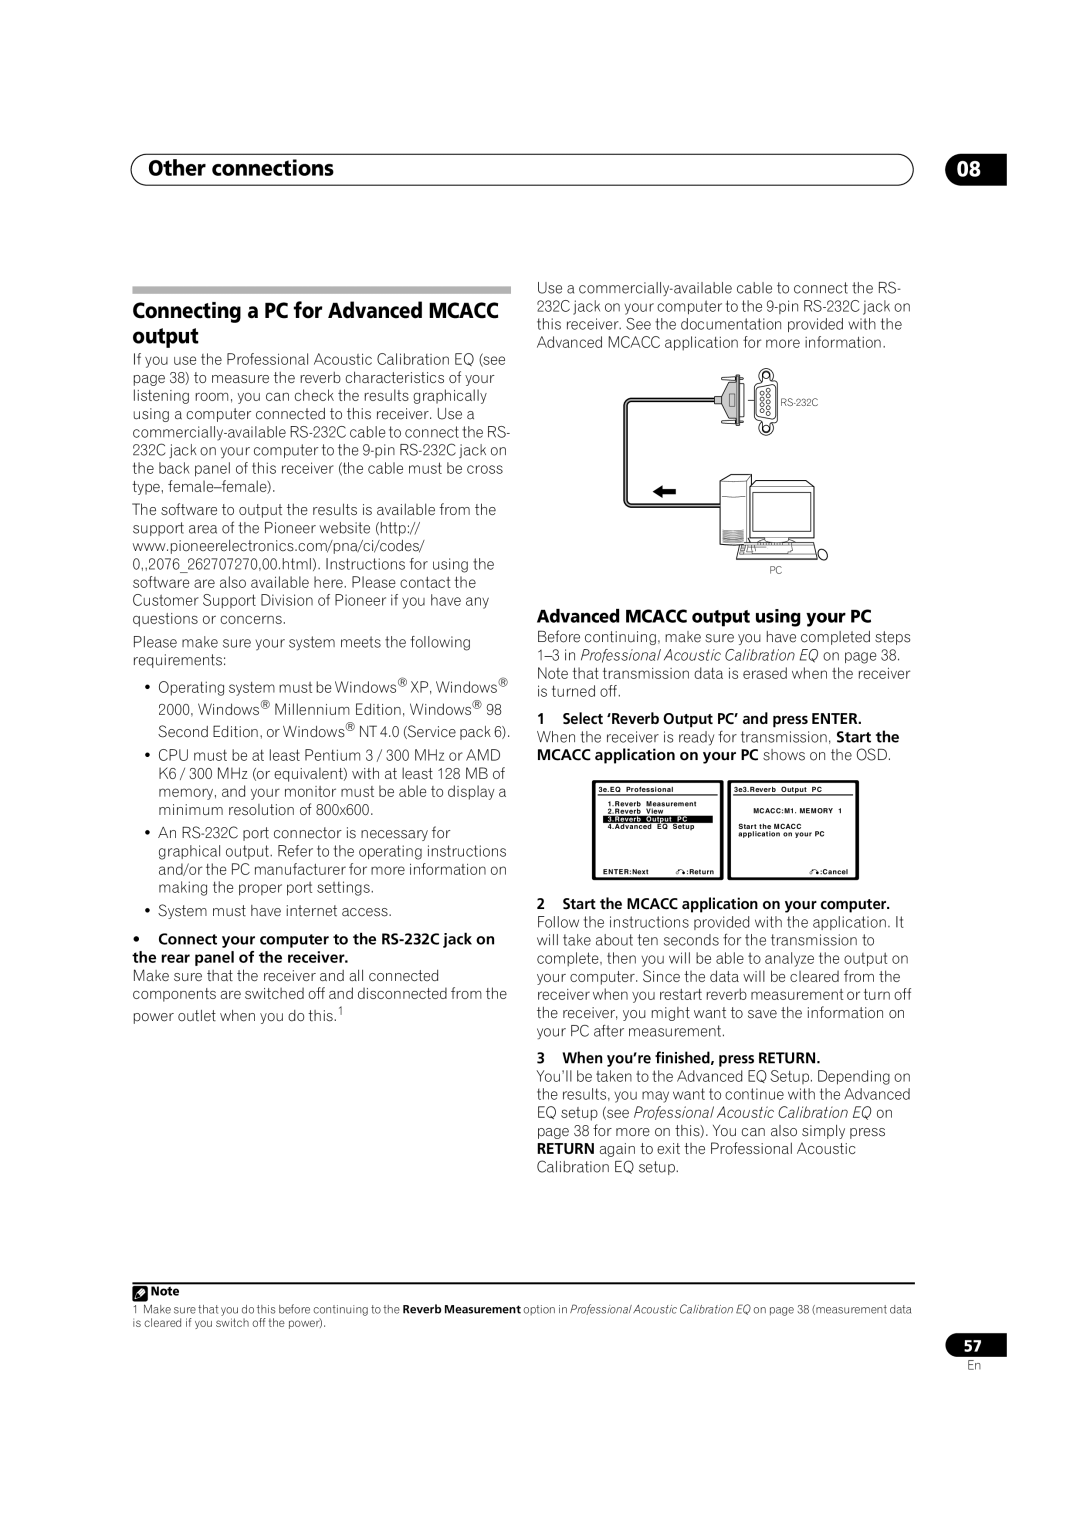 Pioneer VSX-9110TXV-K Connecting a PC for Advanced MCACC output, Advanced MCACC output using your PC, Other connections 